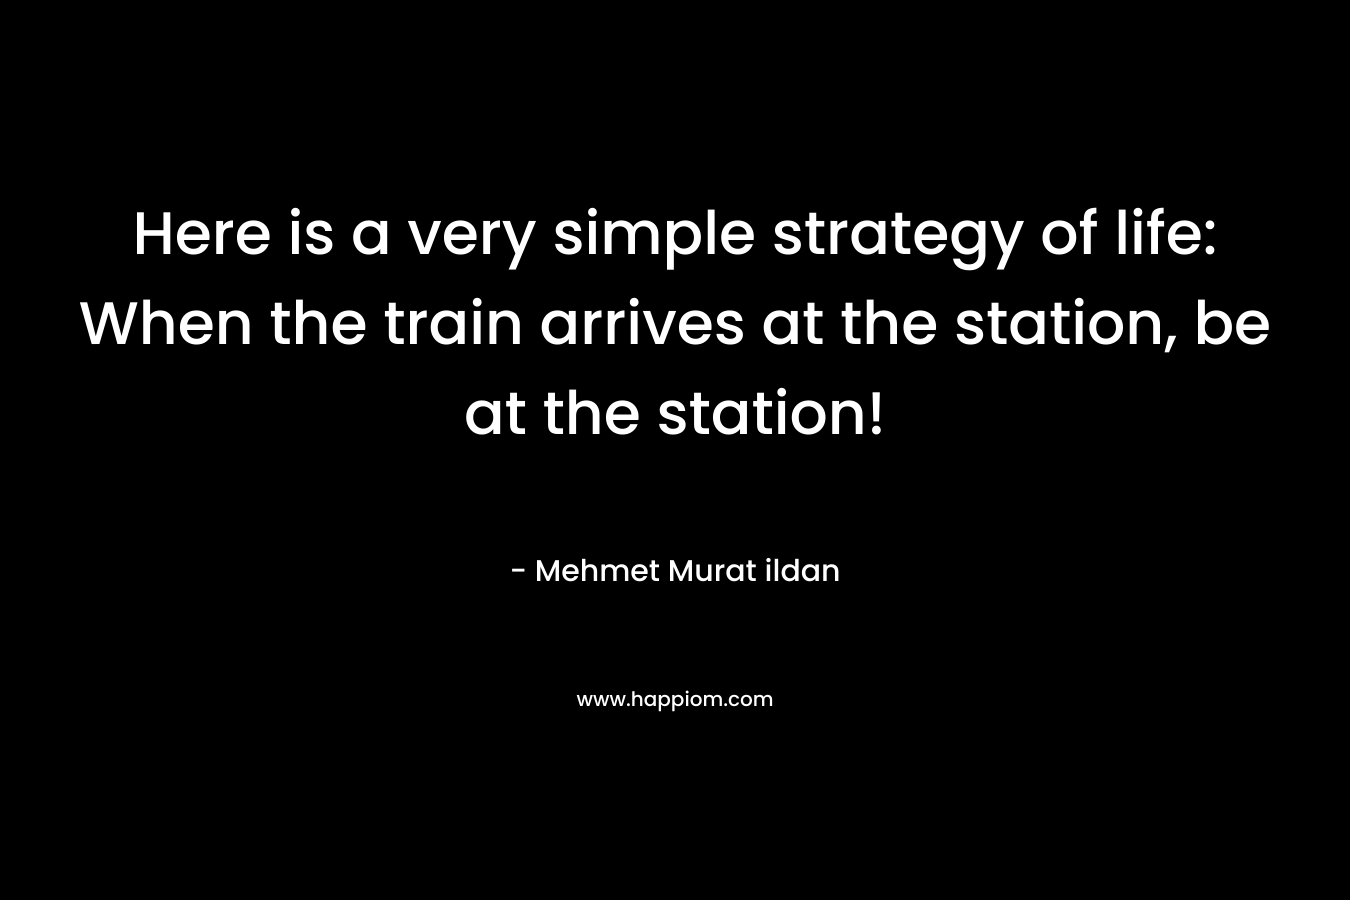 Here is a very simple strategy of life: When the train arrives at the station, be at the station! – Mehmet Murat ildan